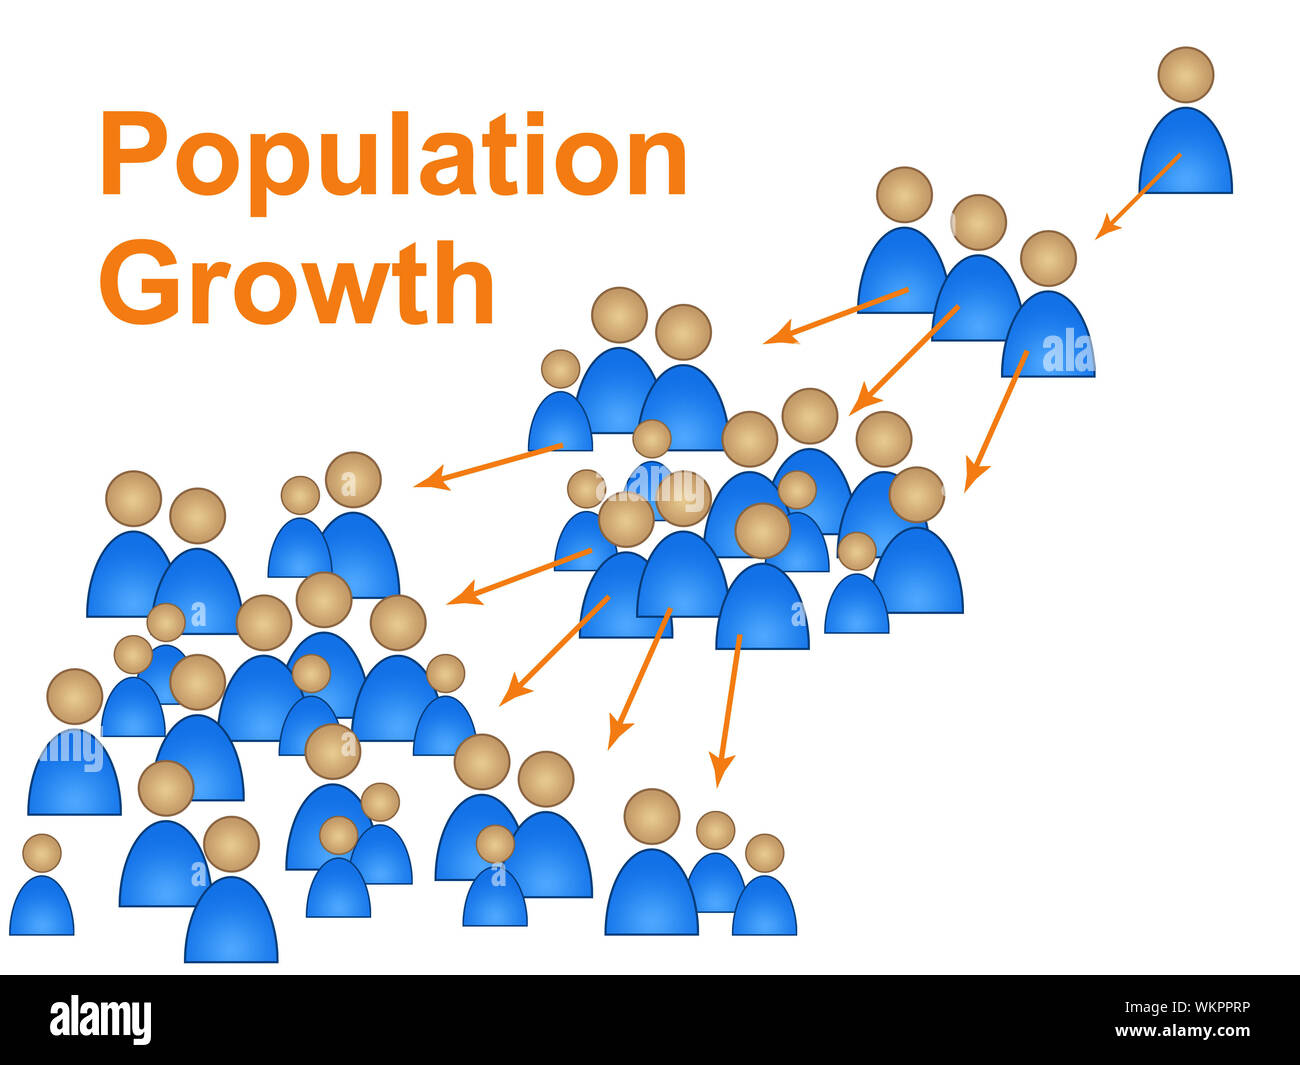 Population Growth Representing Newborn Family And Reproduction Stock Photo